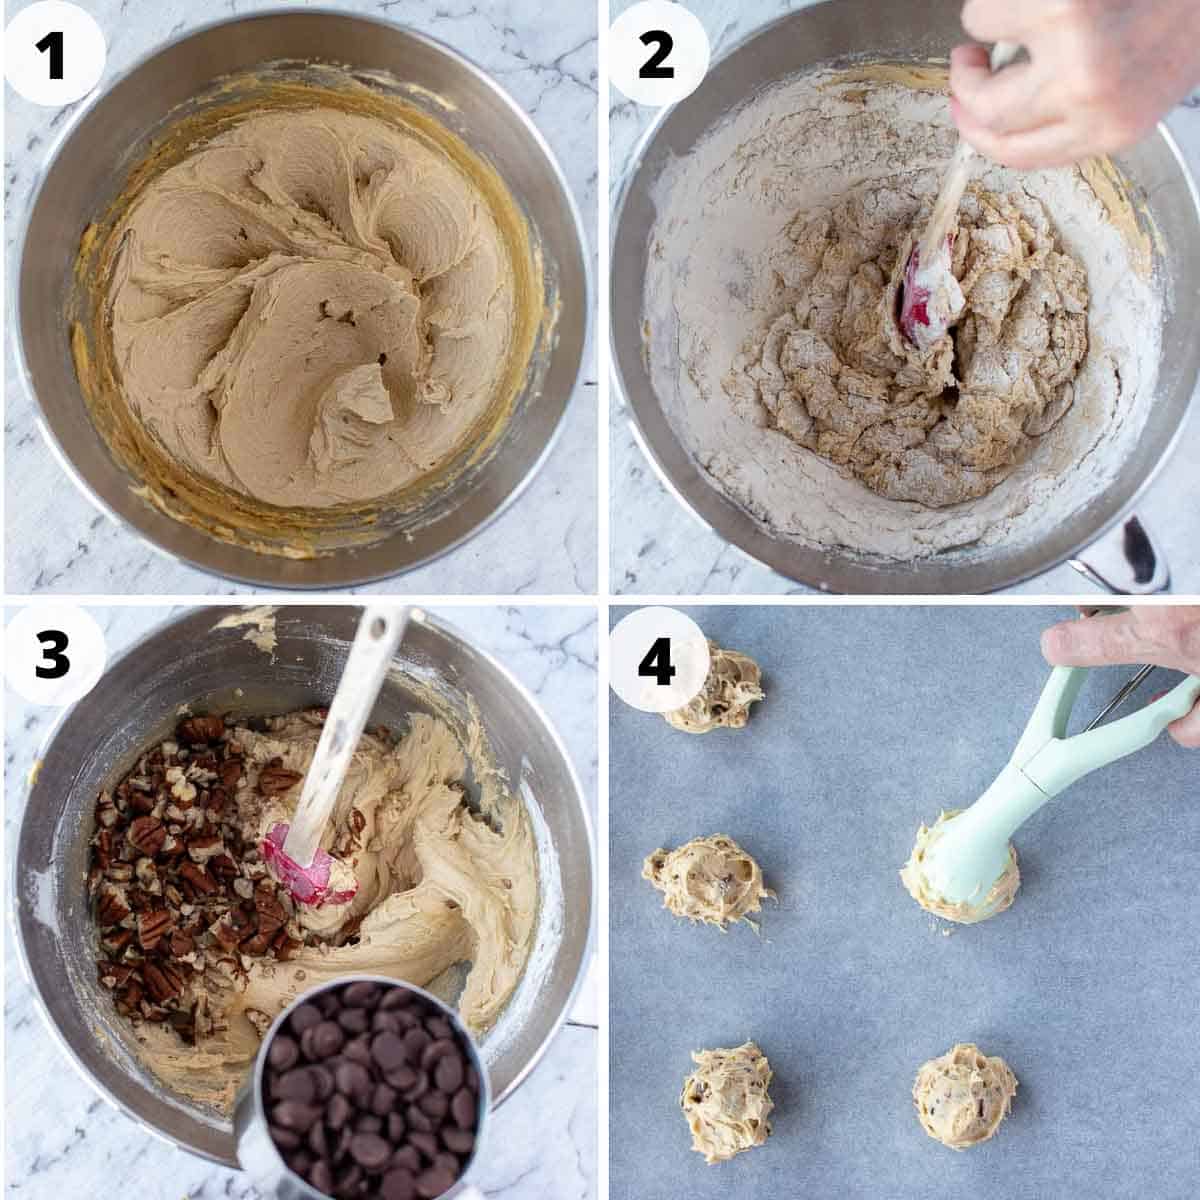 4 step process images showing how to make cookies as in the recipe.